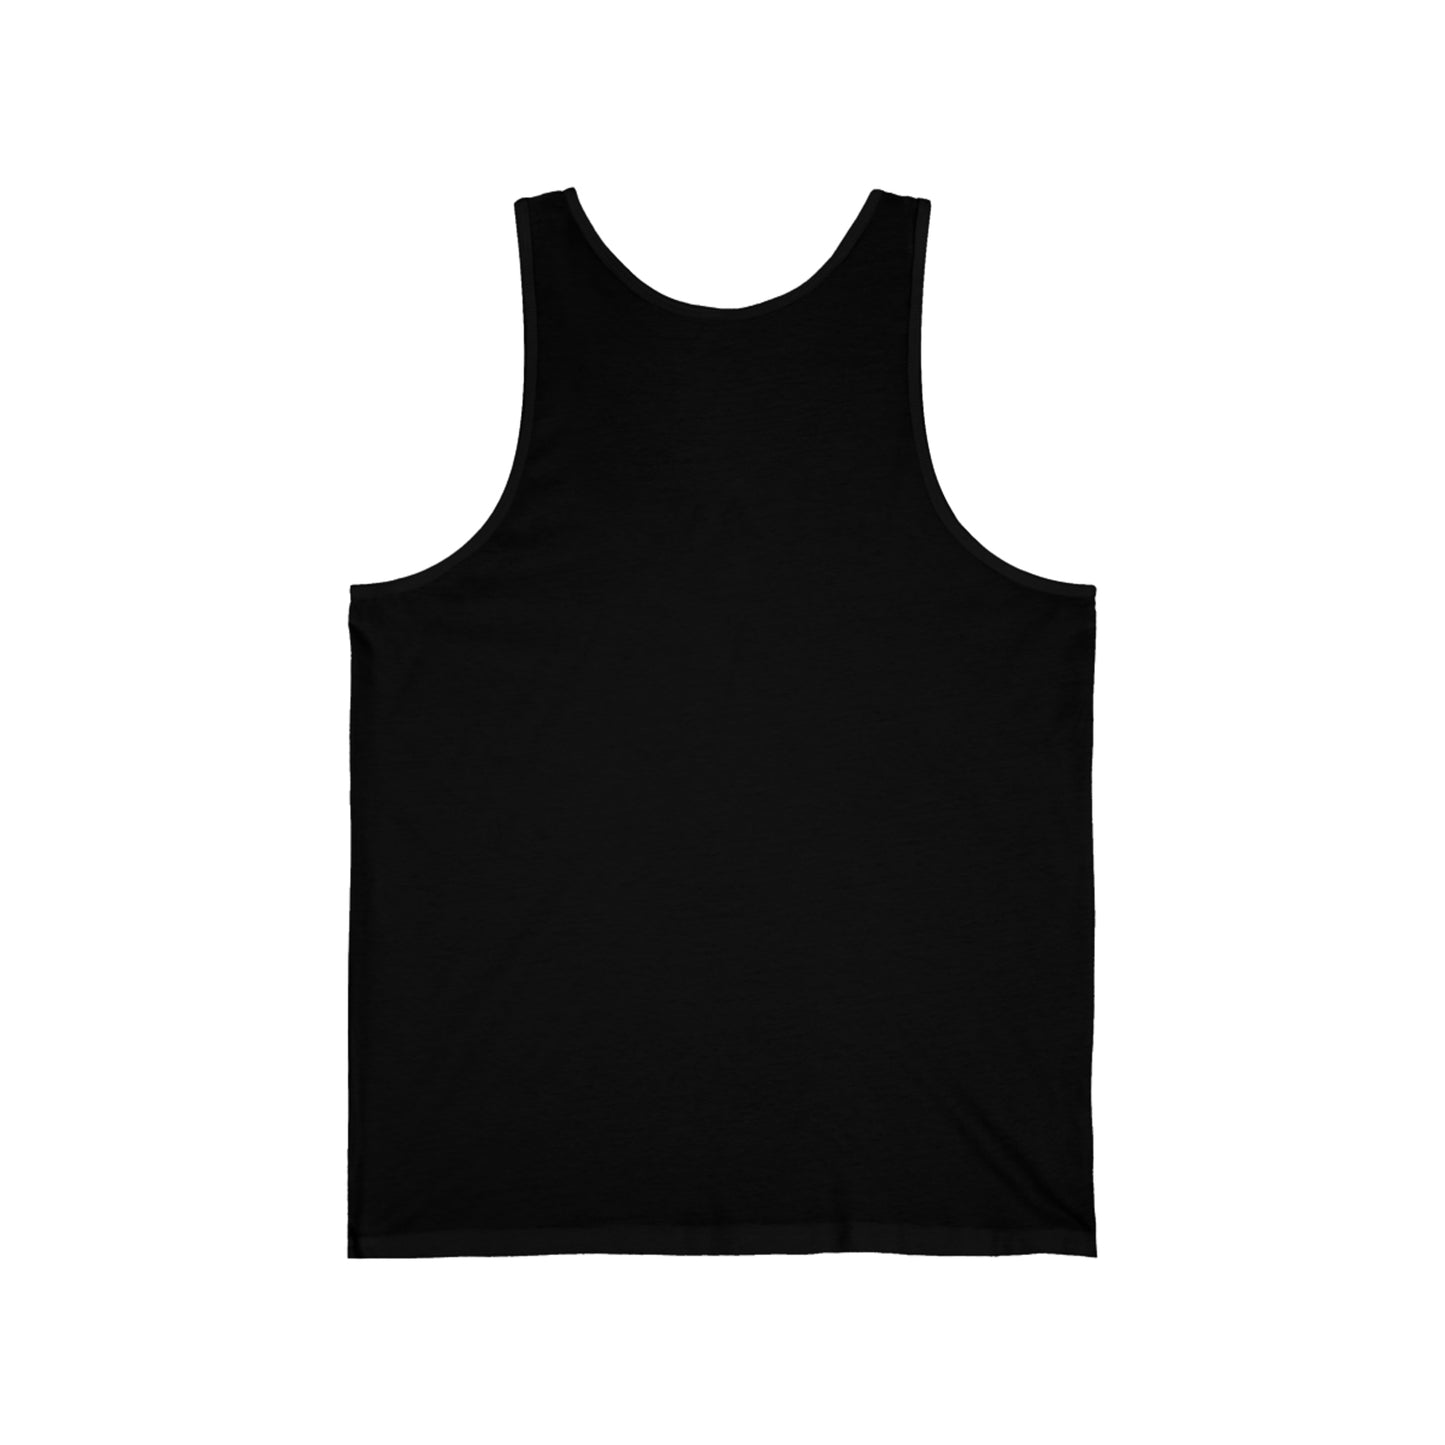 Always Down For Anything Unisex Jersey Tank